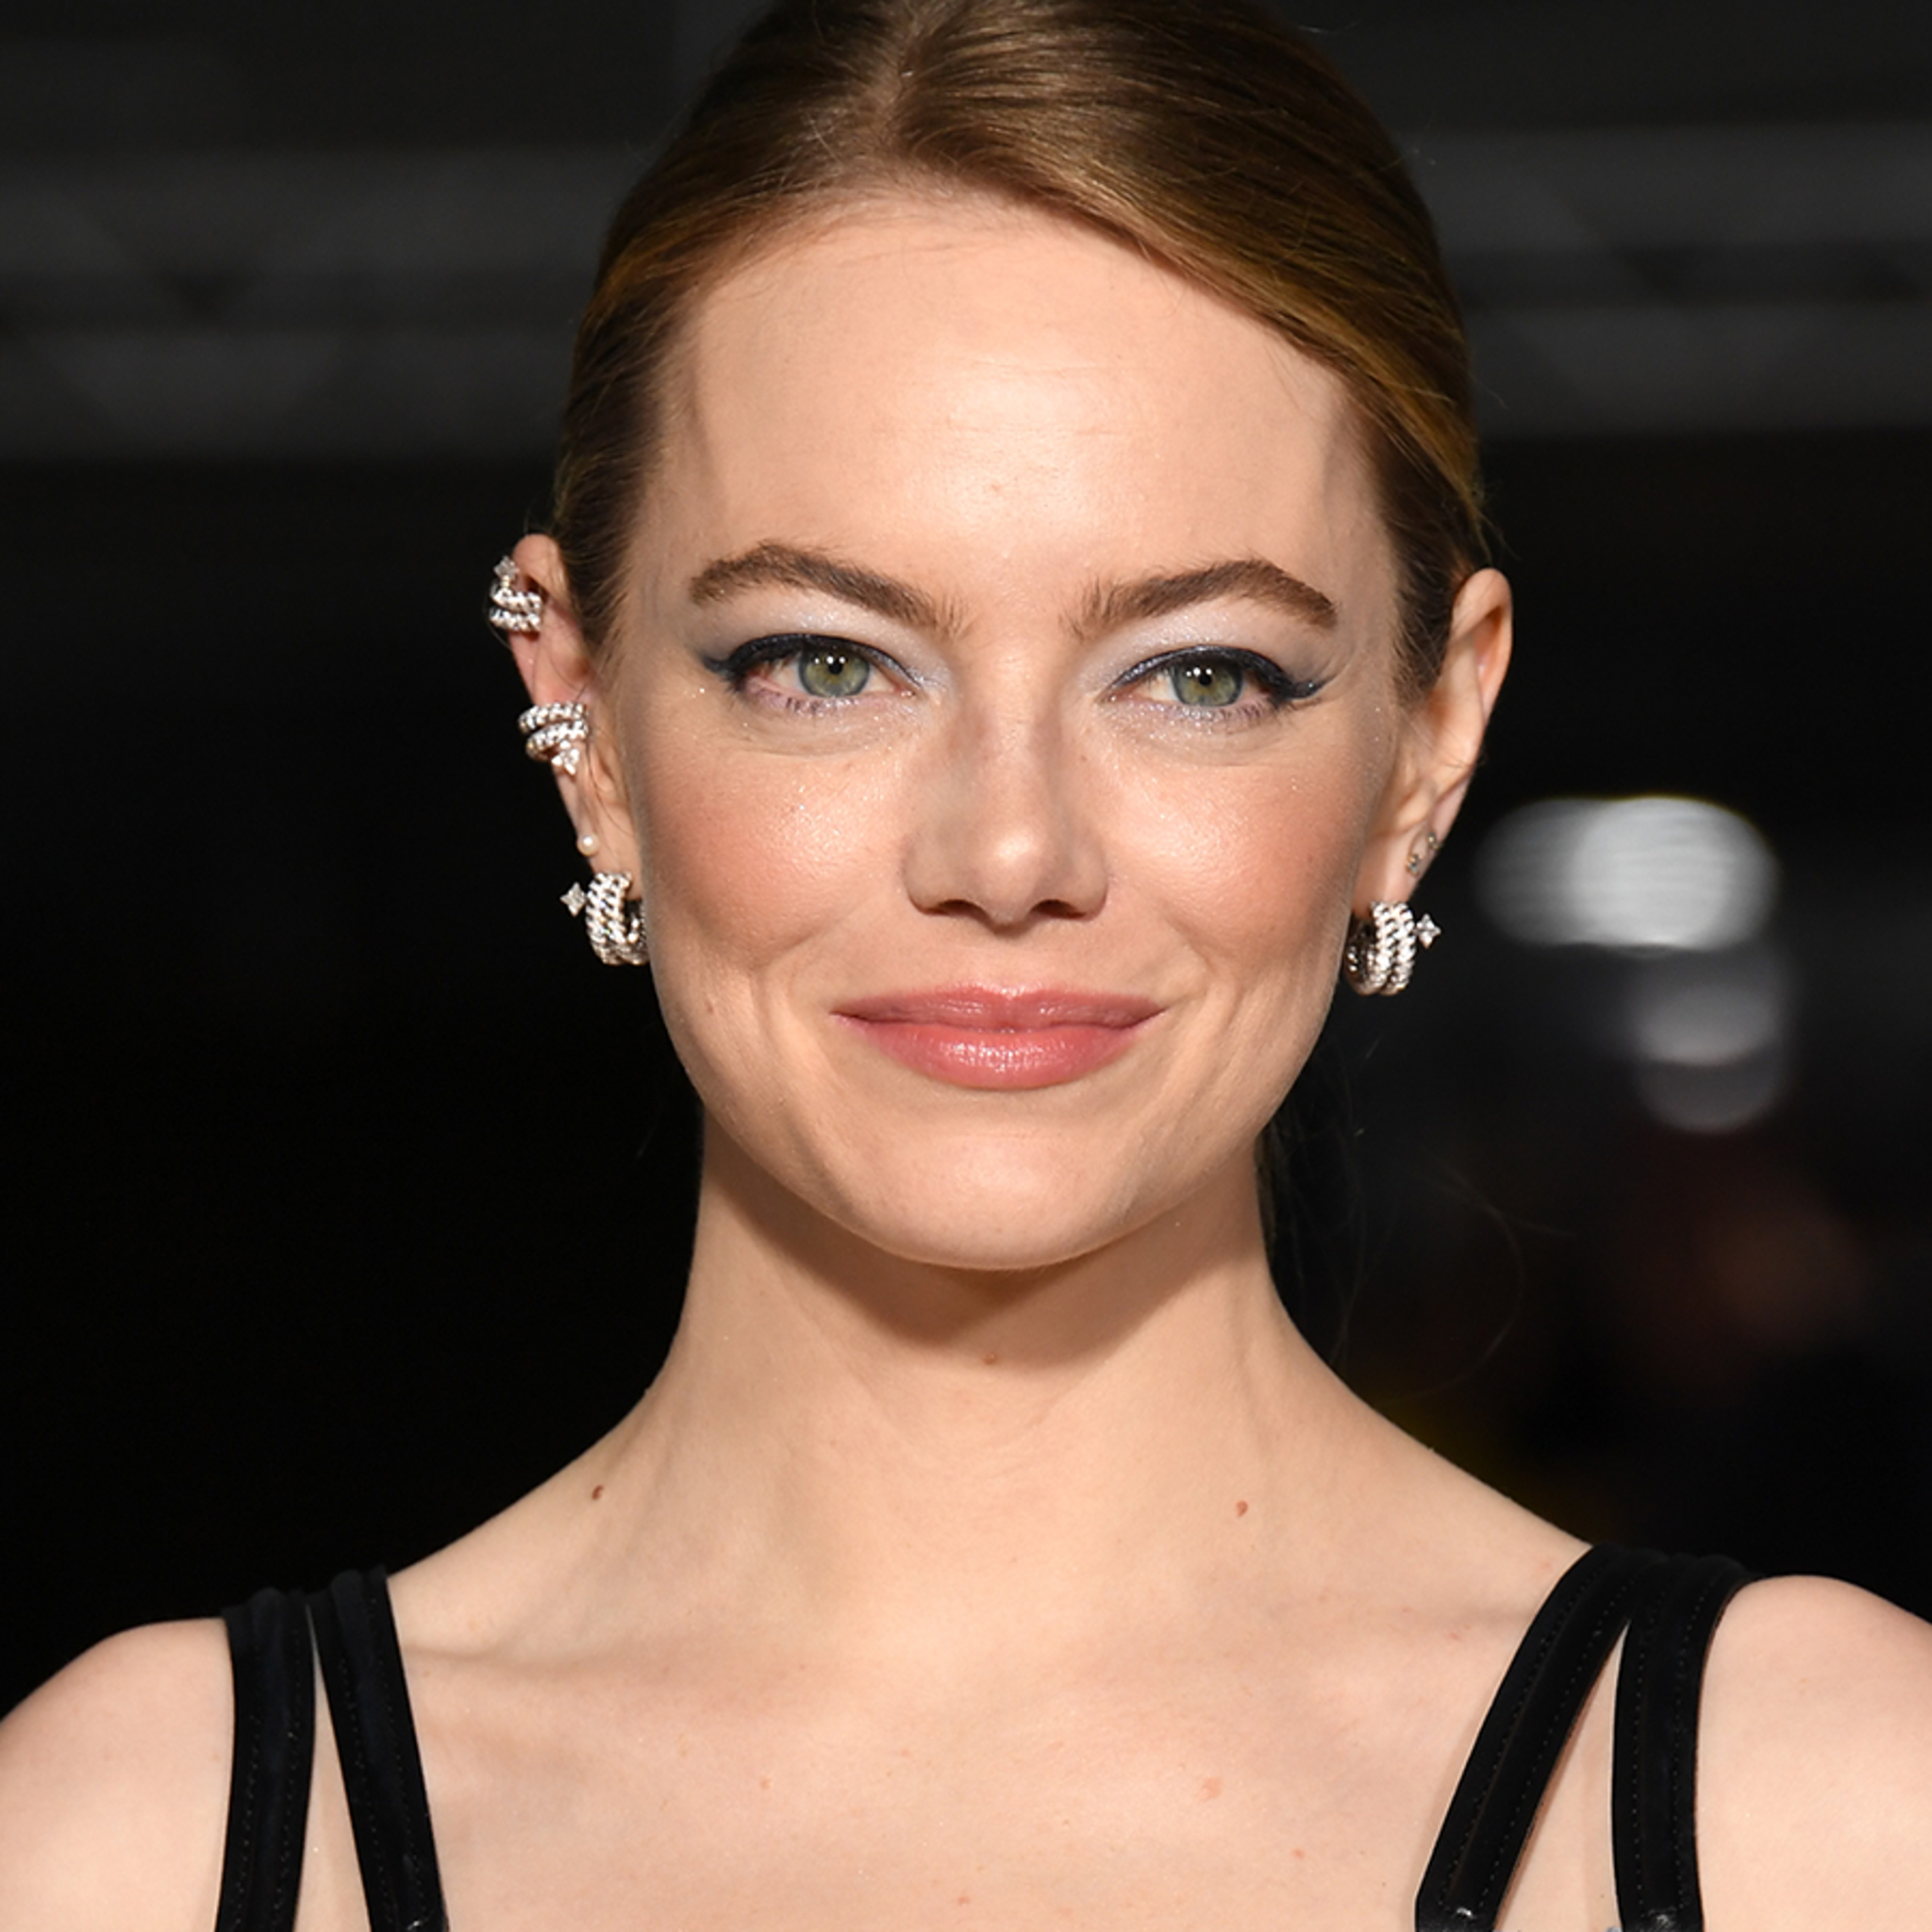 Emma Stone Embraces Graphic Sex in New Film, Plays Lady with Child Mind